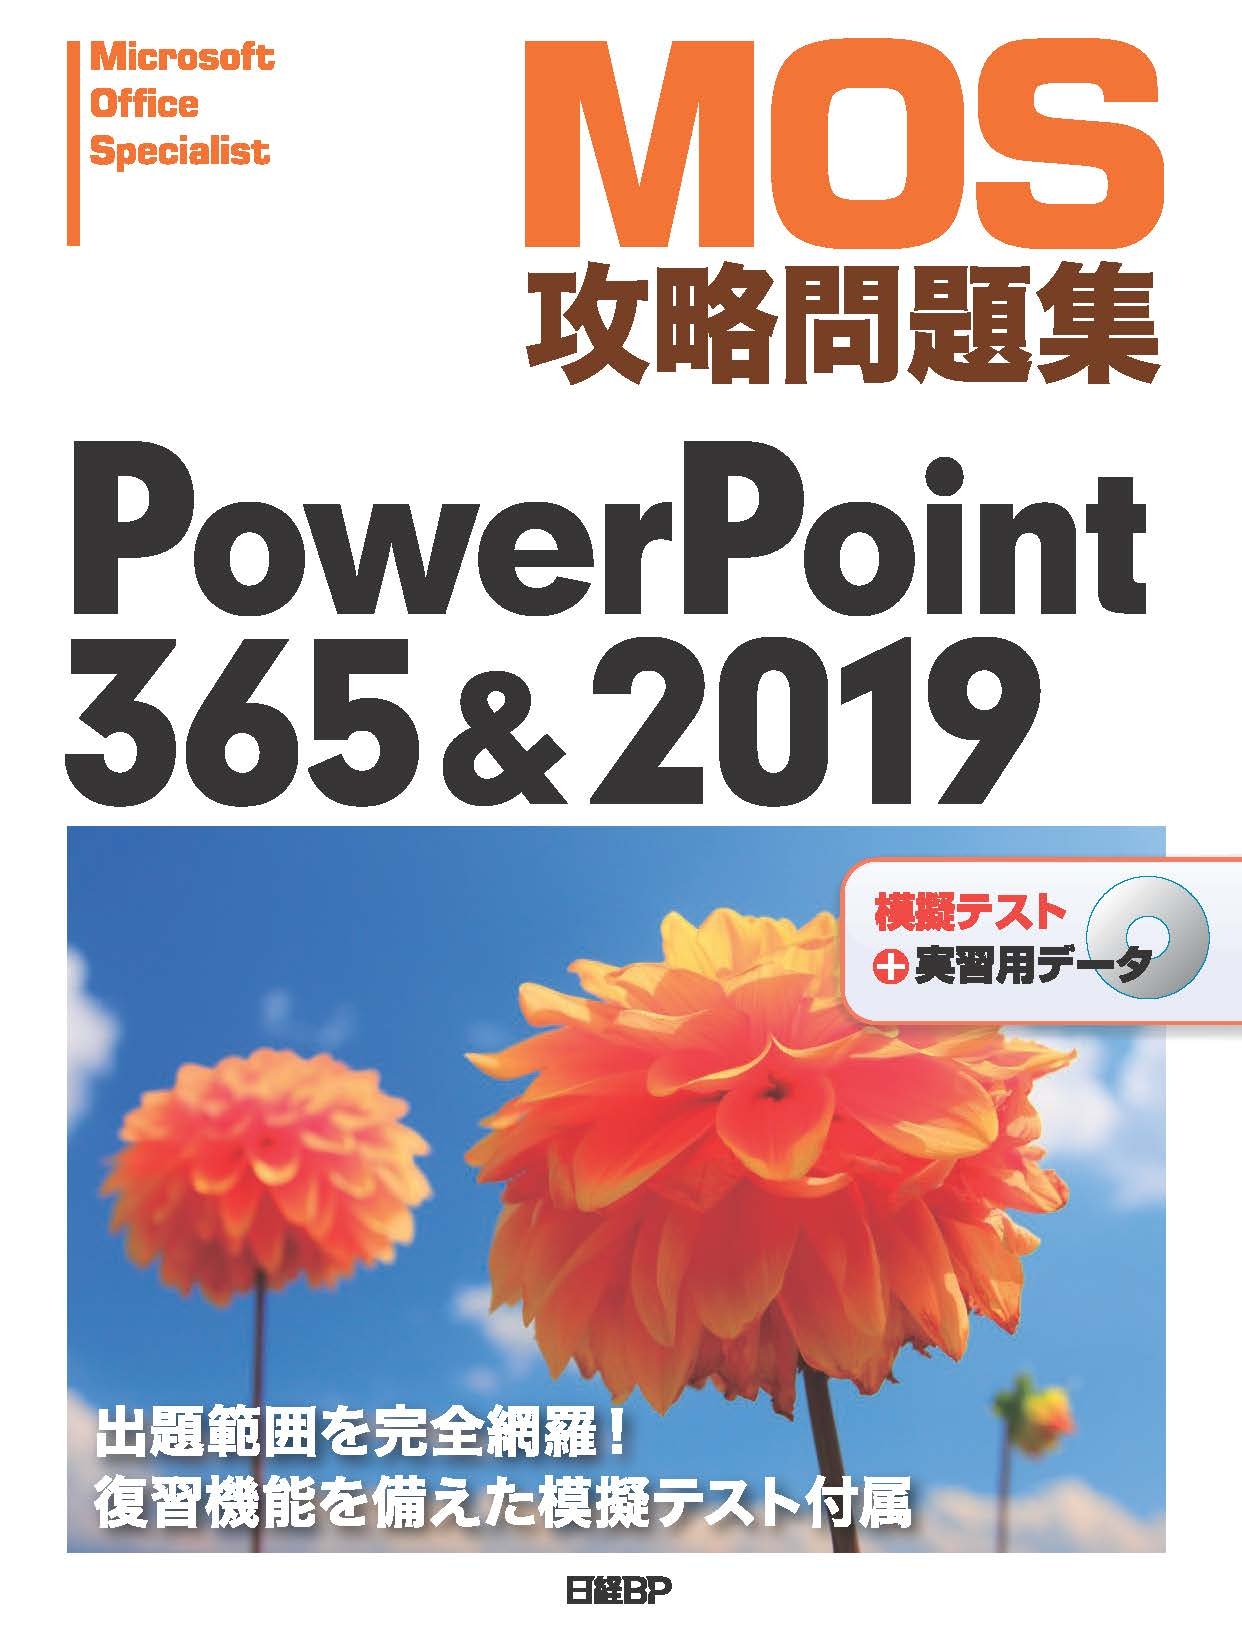 【MOS攻略問題集PowerPoint 365＆2019】模擬テスト用アップデータ